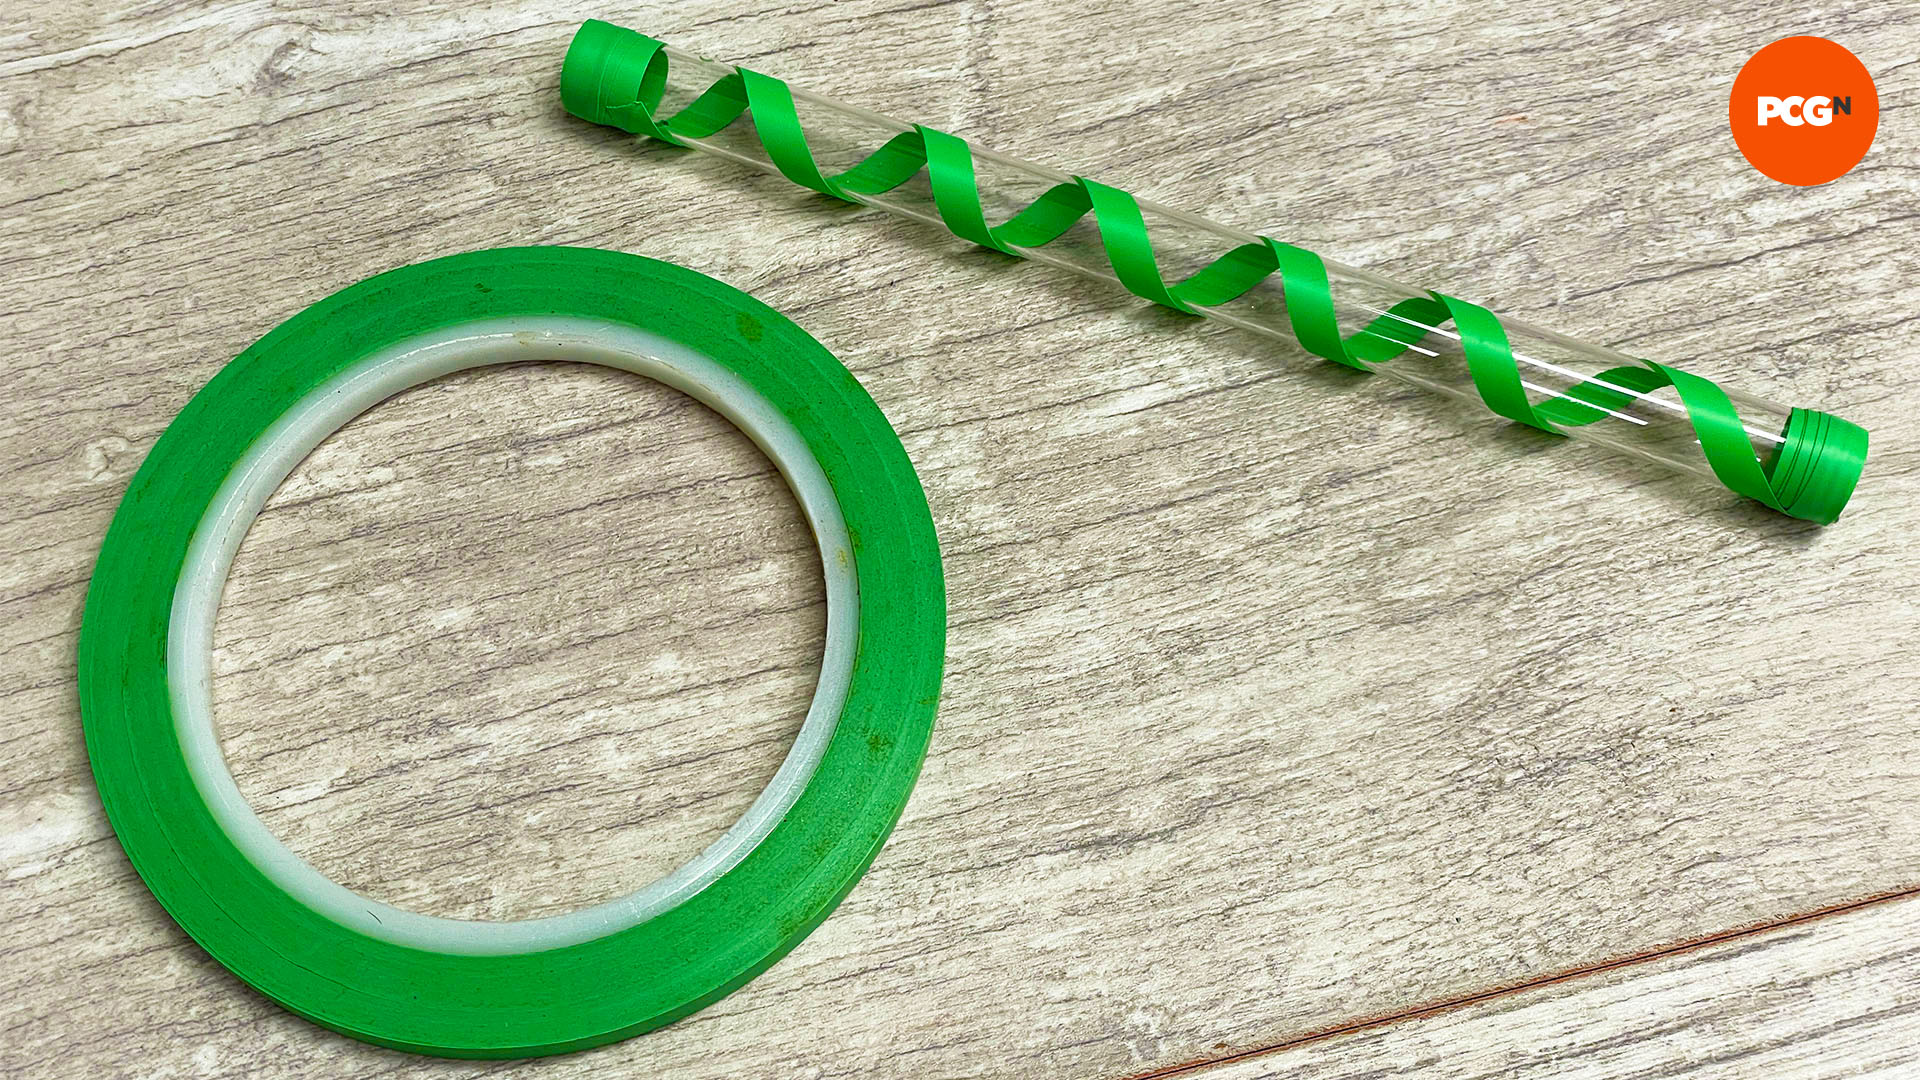 How to paint hard acrylic water cooling tubing: Apple edging masking tape